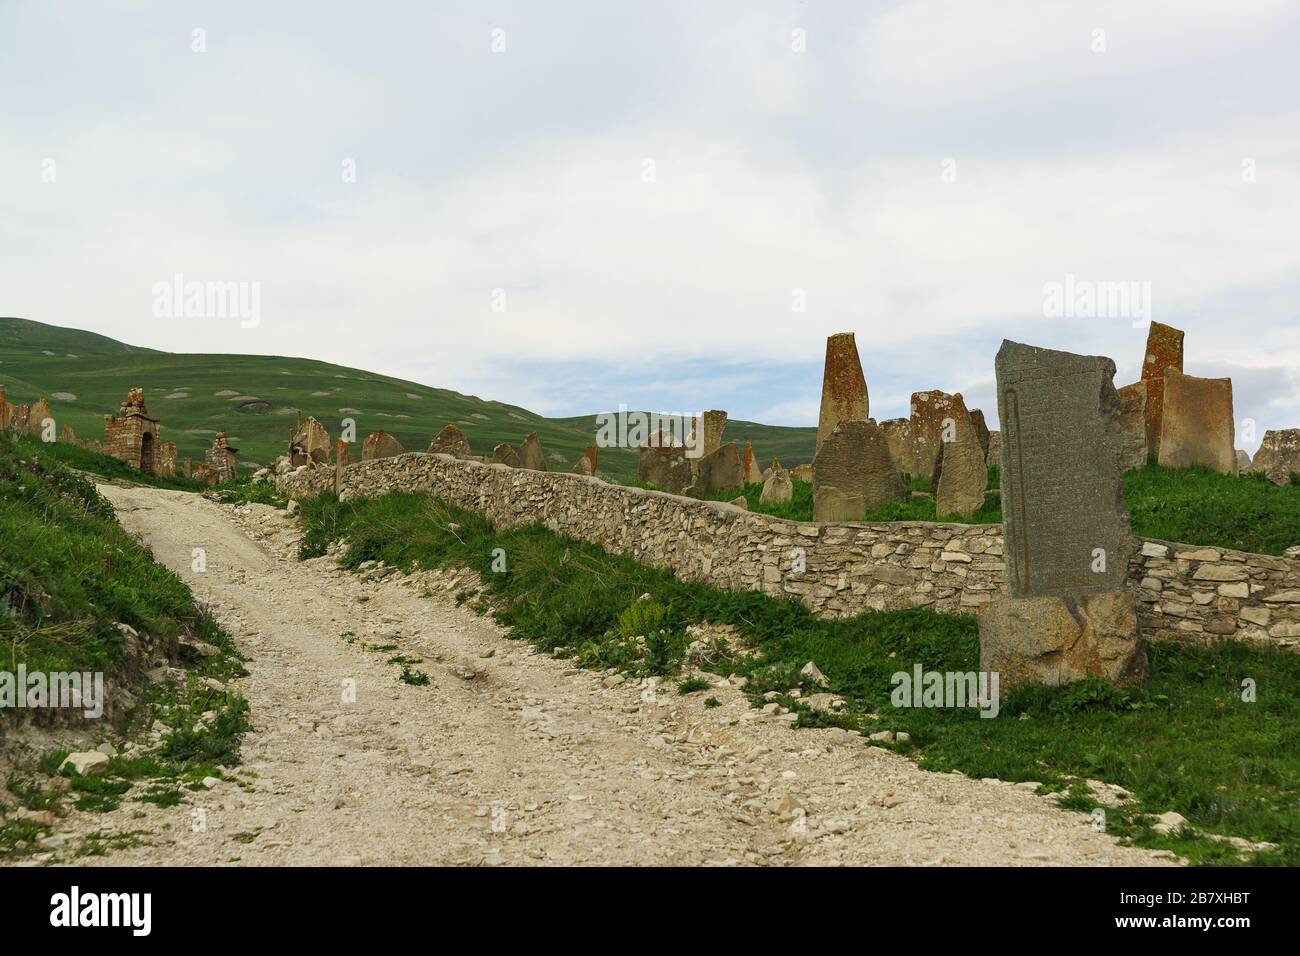 Medieval necropolis 'City of the dead' in the settlement of Hoi. Tombstones are narrow, tall stones. Cloudy evening Stock Photo